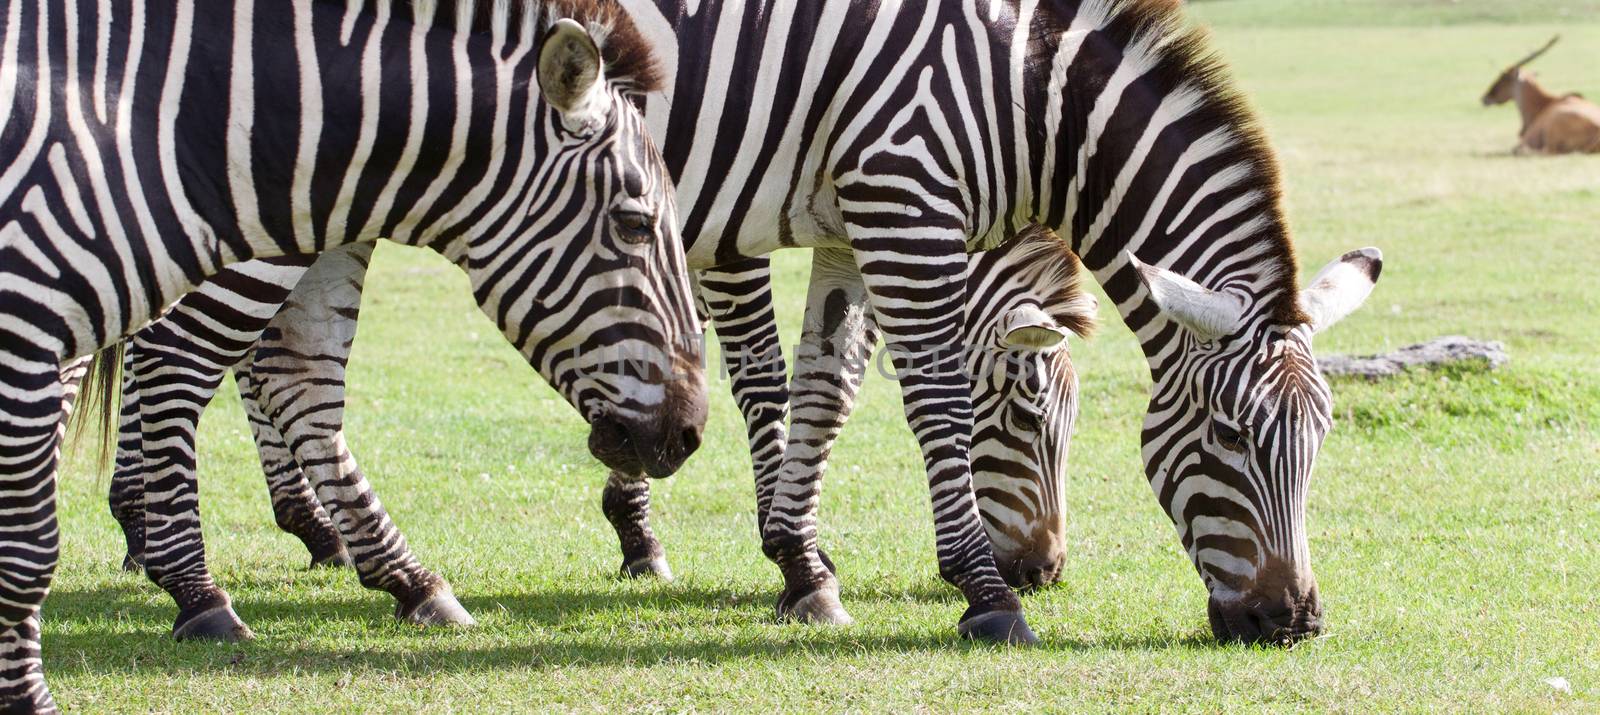 Three beautiful zebras together on the grass field